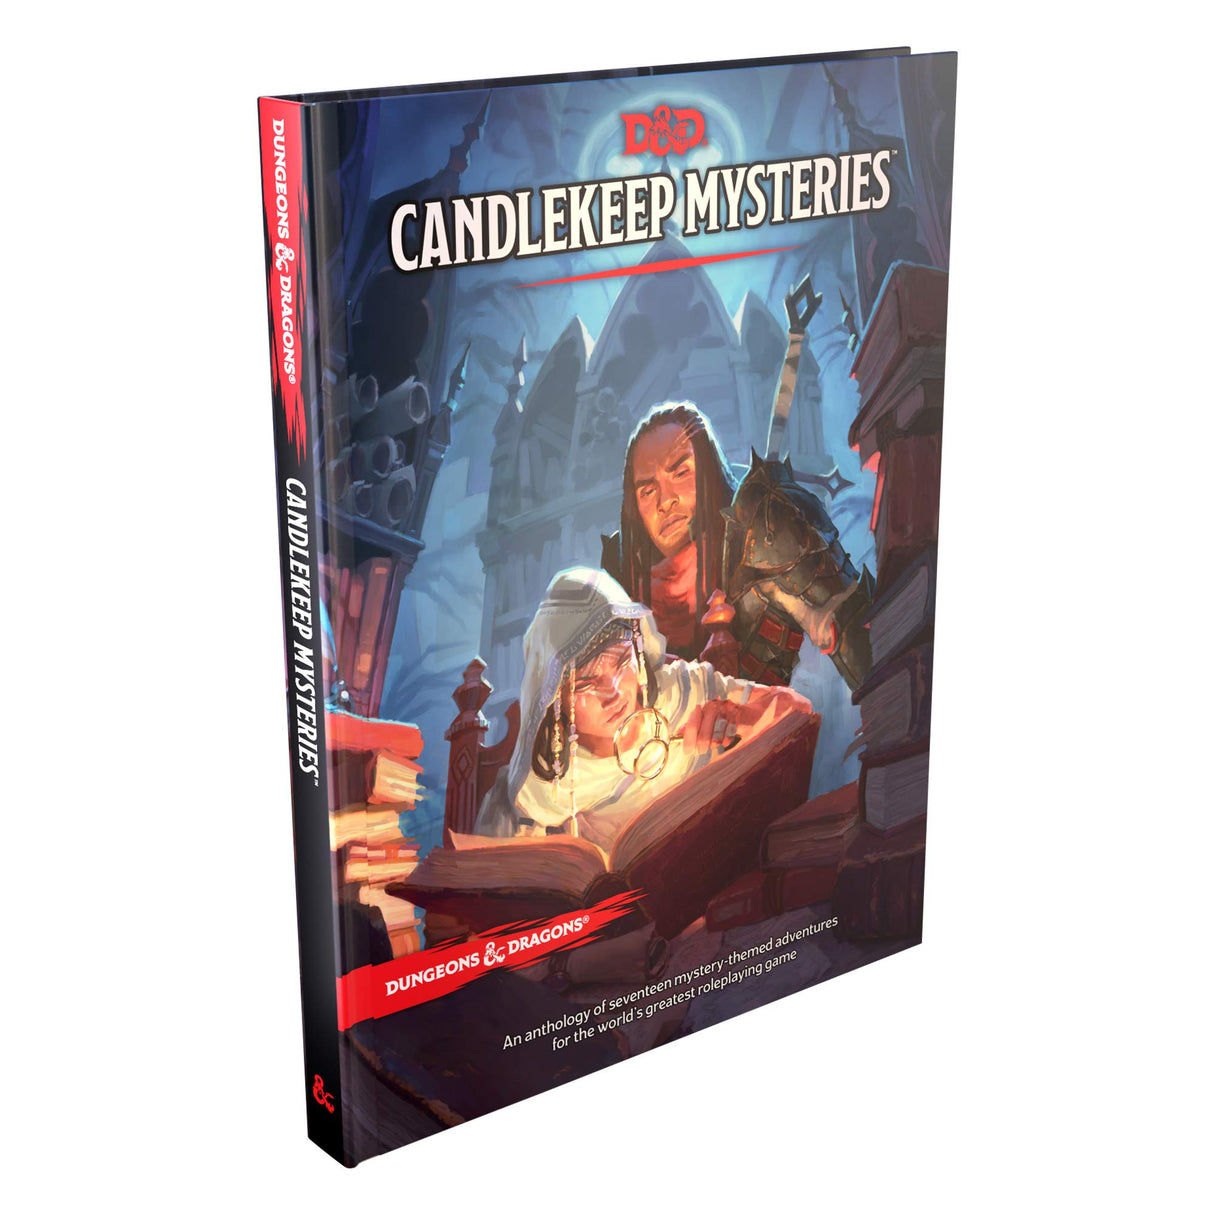 Dungeons & Dragons Candlekeep Mysteries Hardcover Wizards of the Coast DUNGEONS & DRAGONS